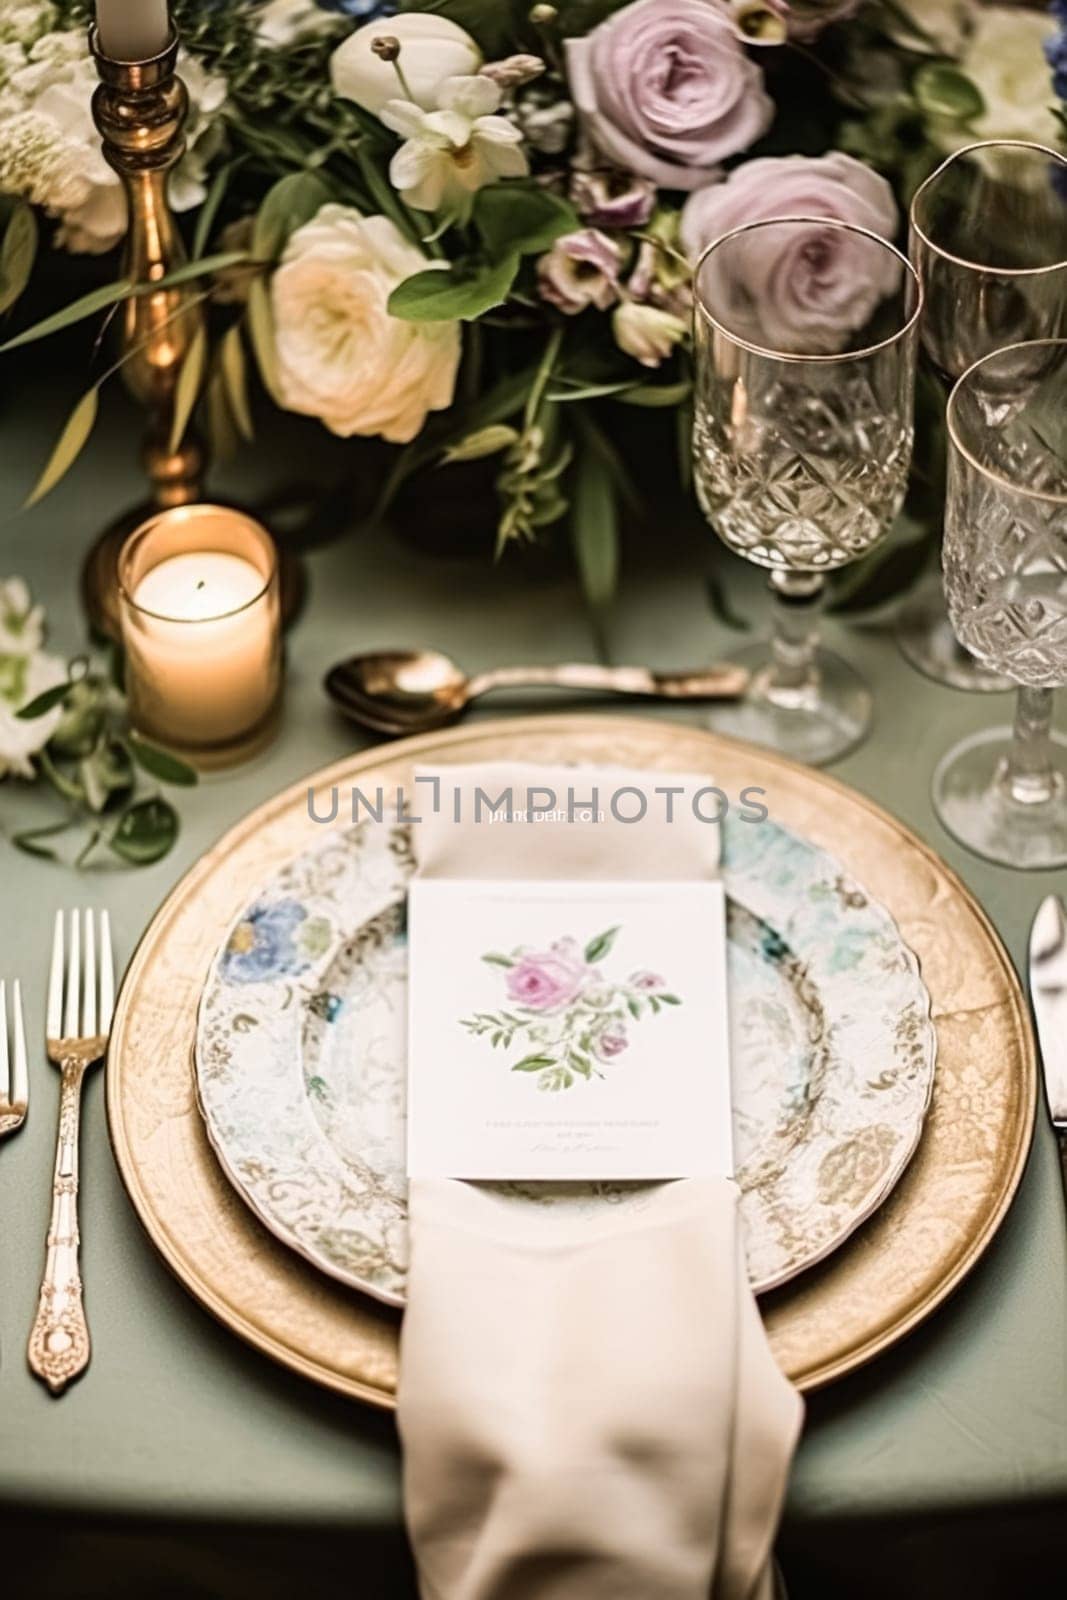 Floral wedding table decor, holiday tablescape and dinner table setting, formal event decoration for wedding reception, family celebration, English country and home styling inspiration